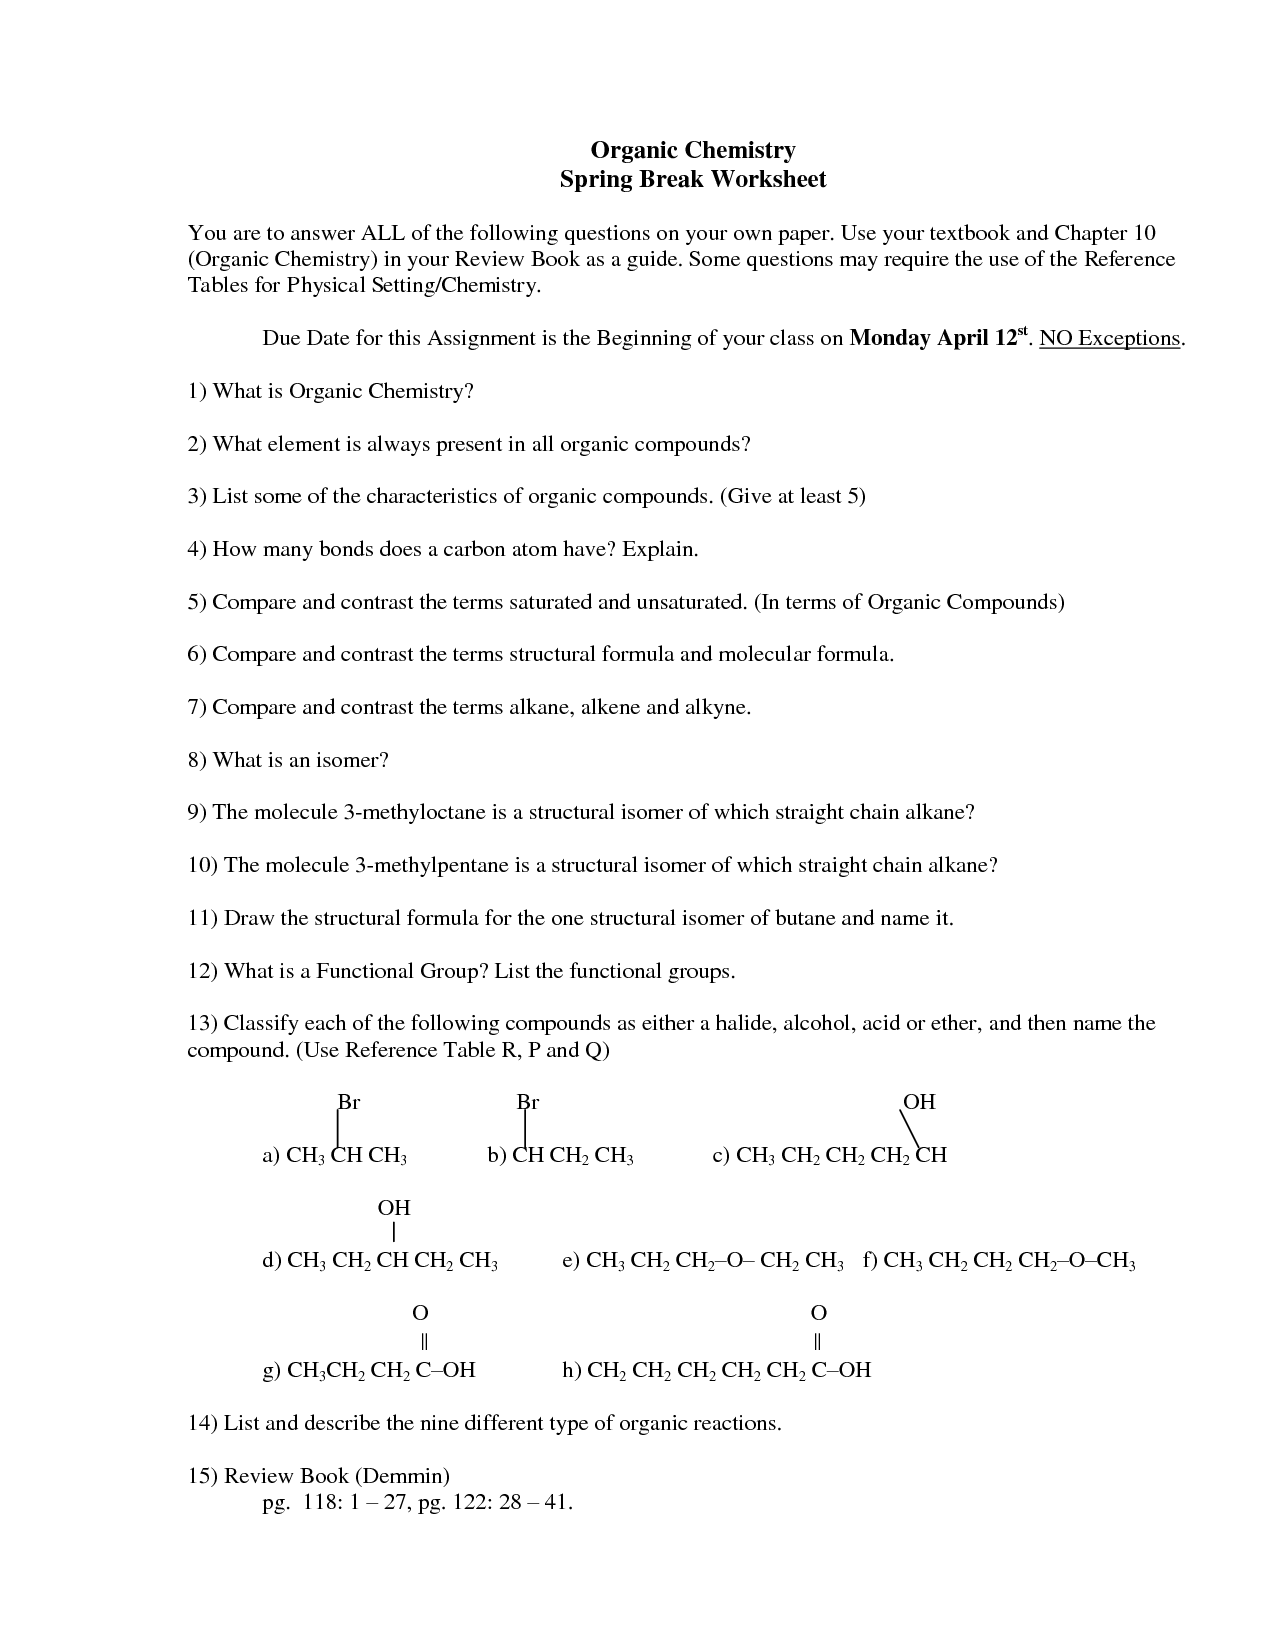 Organic Molecules Worksheet Review Answers Image